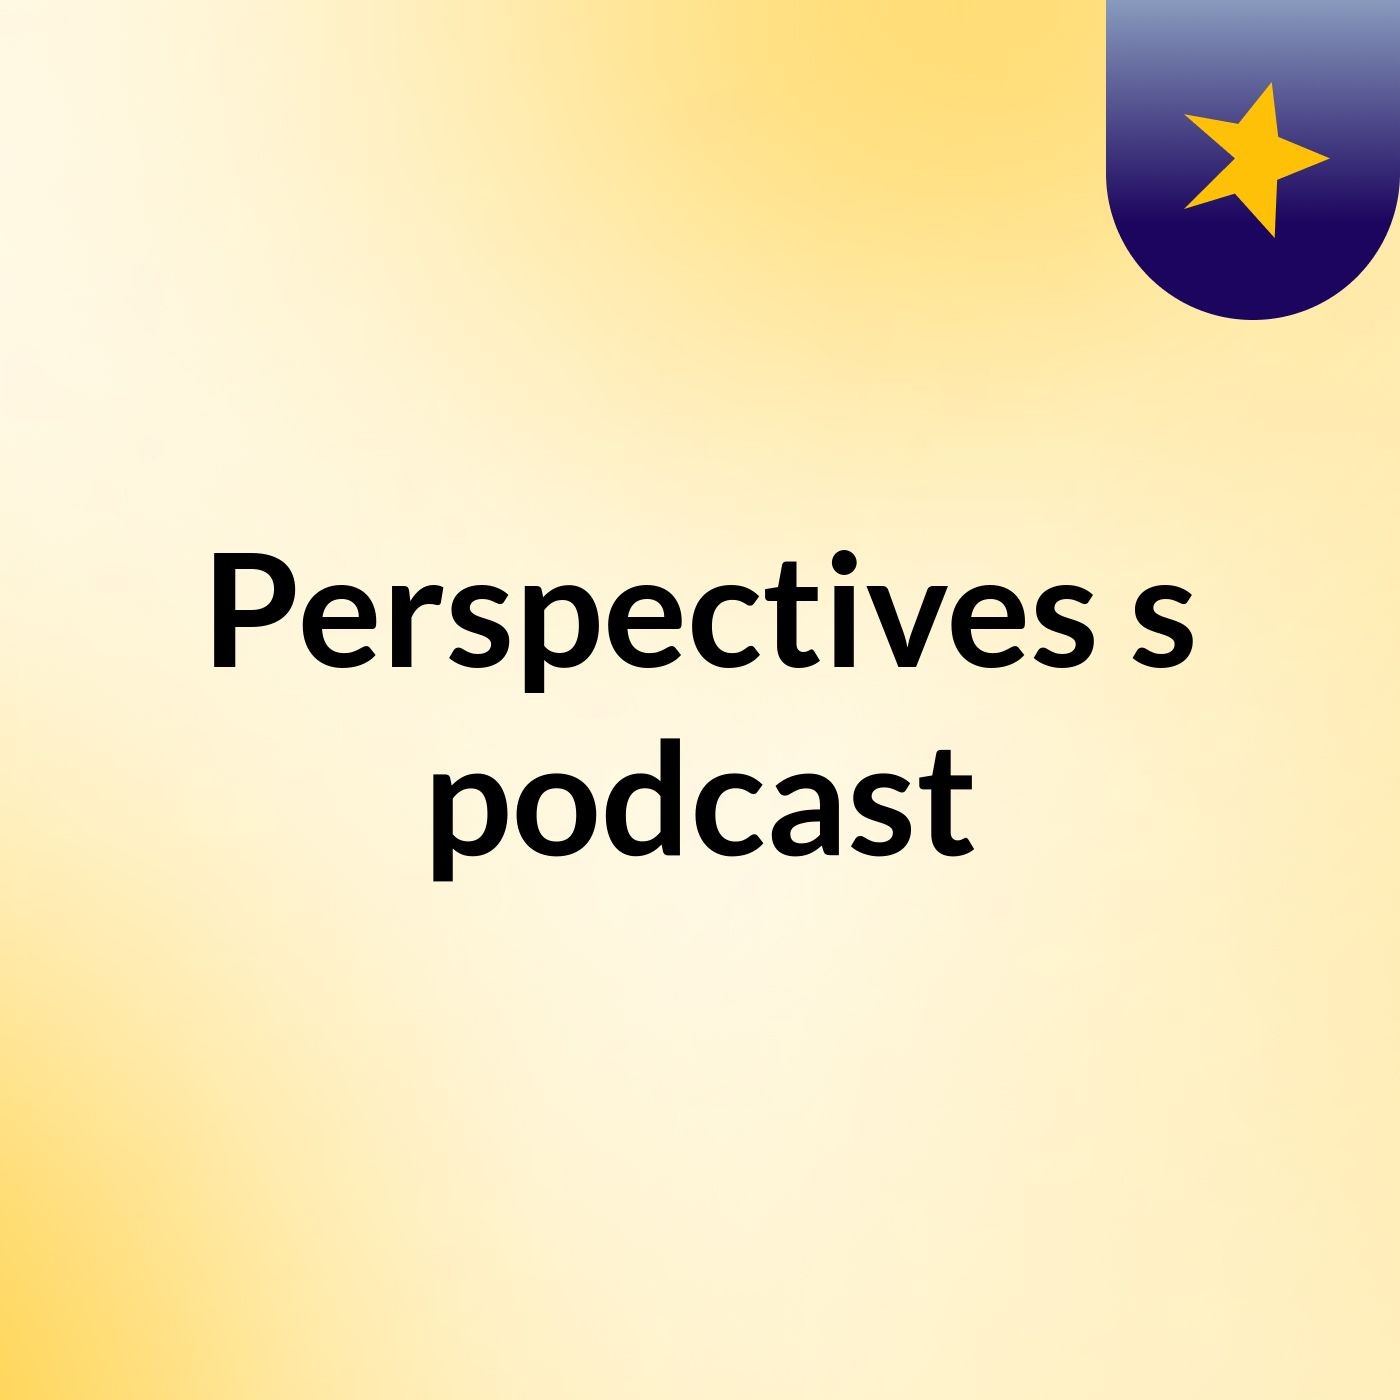 #Perspectives's podcast